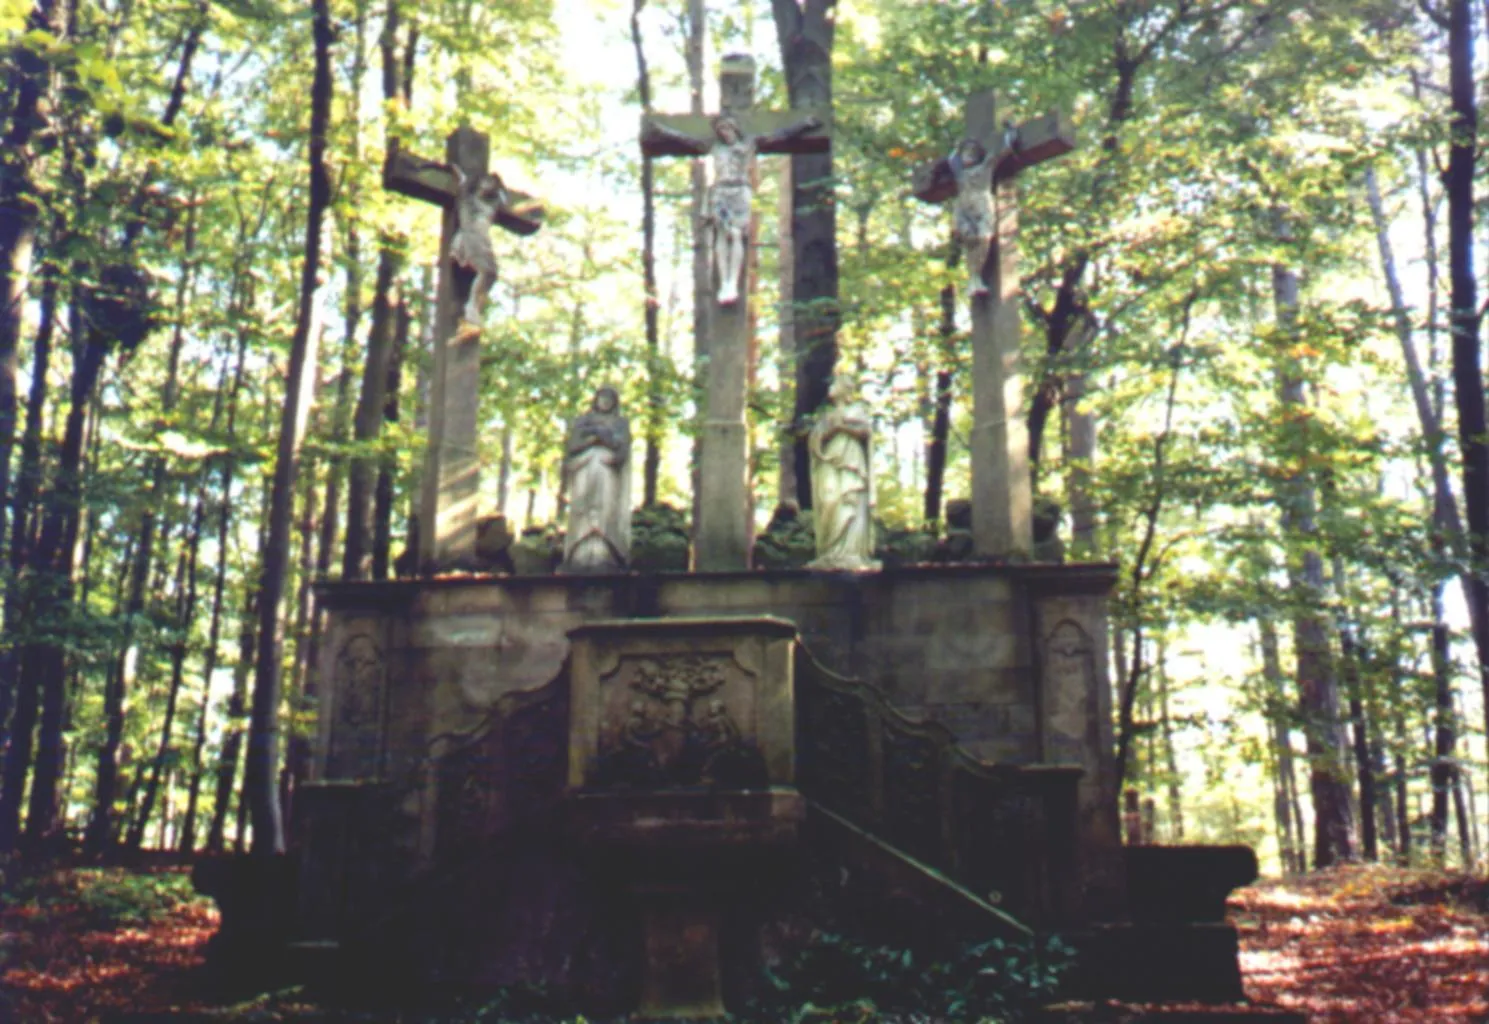 Photo showing: 12th Station of the Way of the Cross of the "Stationsberg" in Bad Kissingen (Bavaria, Germany)